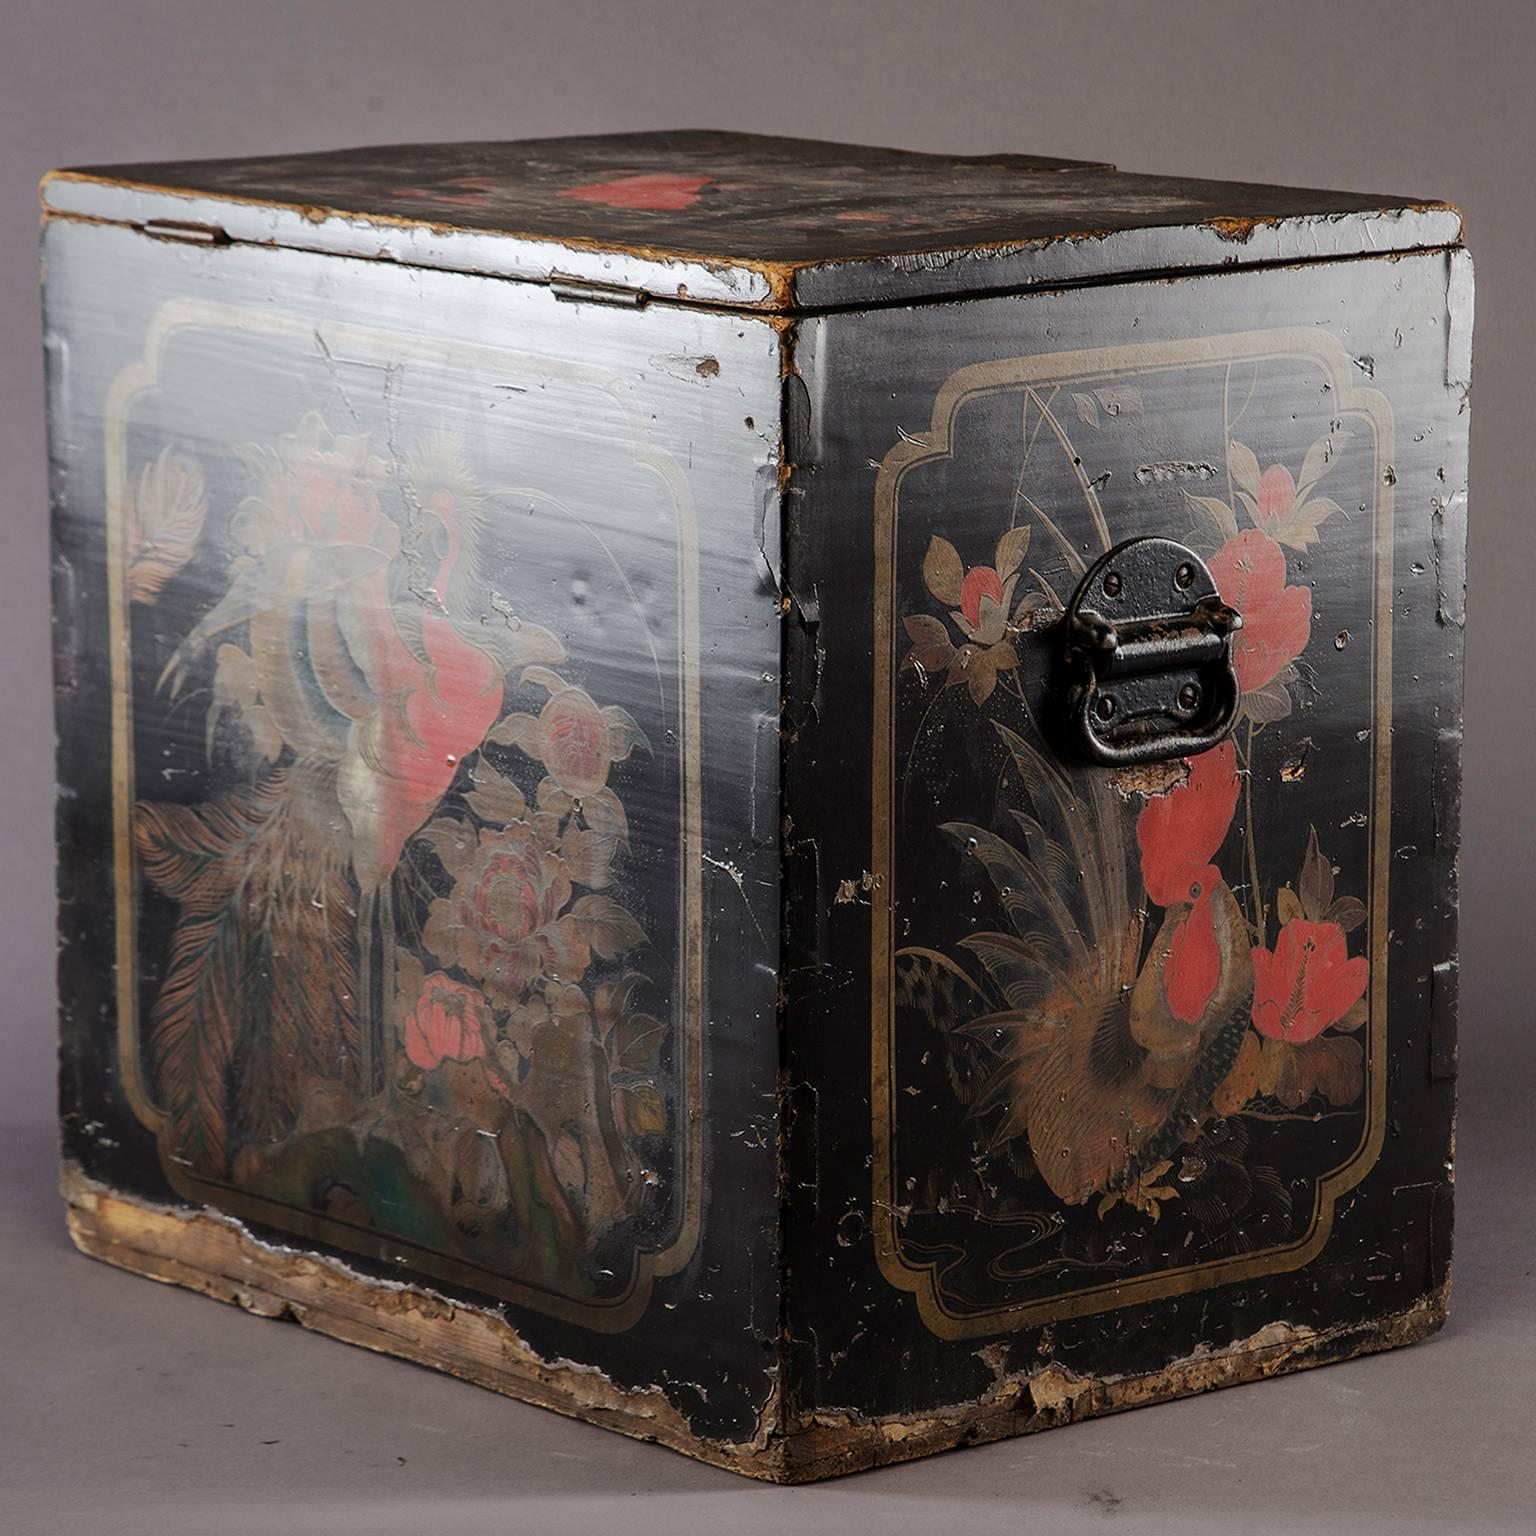 Large wooden Japanese store display tea box, circa 1880s. All original finish with black back ground and decorative flowers, vines and birds, and a peacock in red and gold. Visible wear to finish and edges. Original hardware. Lettering/writing on